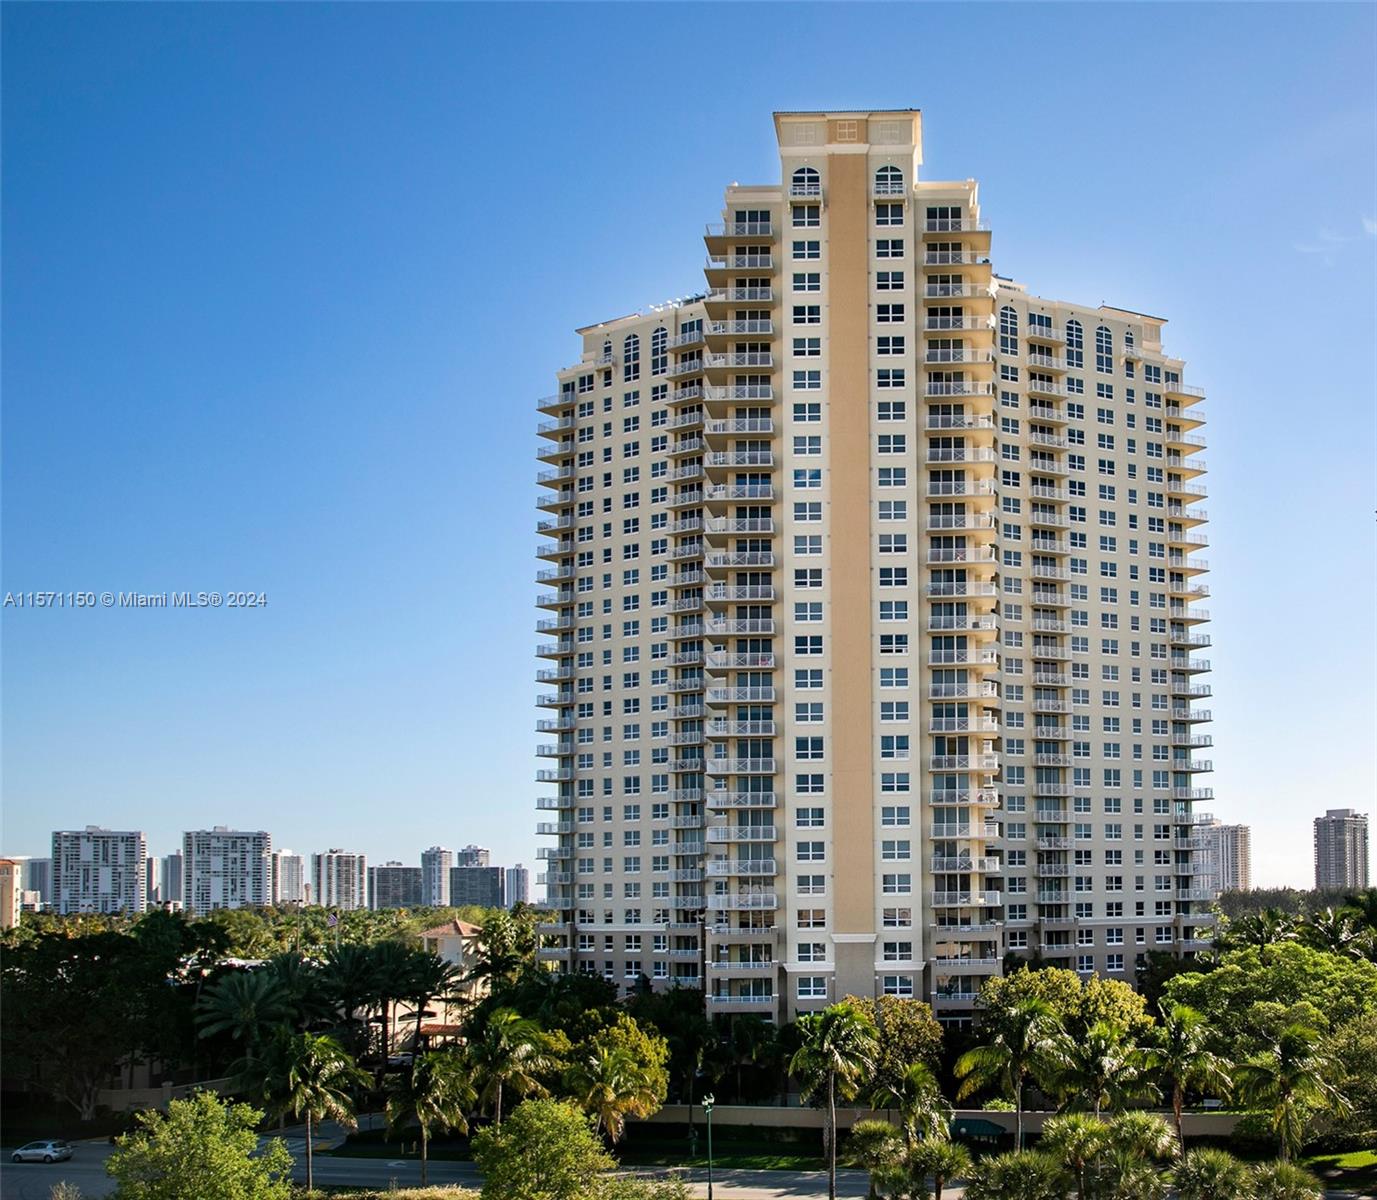 19501 W Country Club Dr 2306, Aventura, Florida 33180, 1 Bedroom Bedrooms, ,1 BathroomBathrooms,Residential,For Sale,19501 W Country Club Dr 2306,A11571150